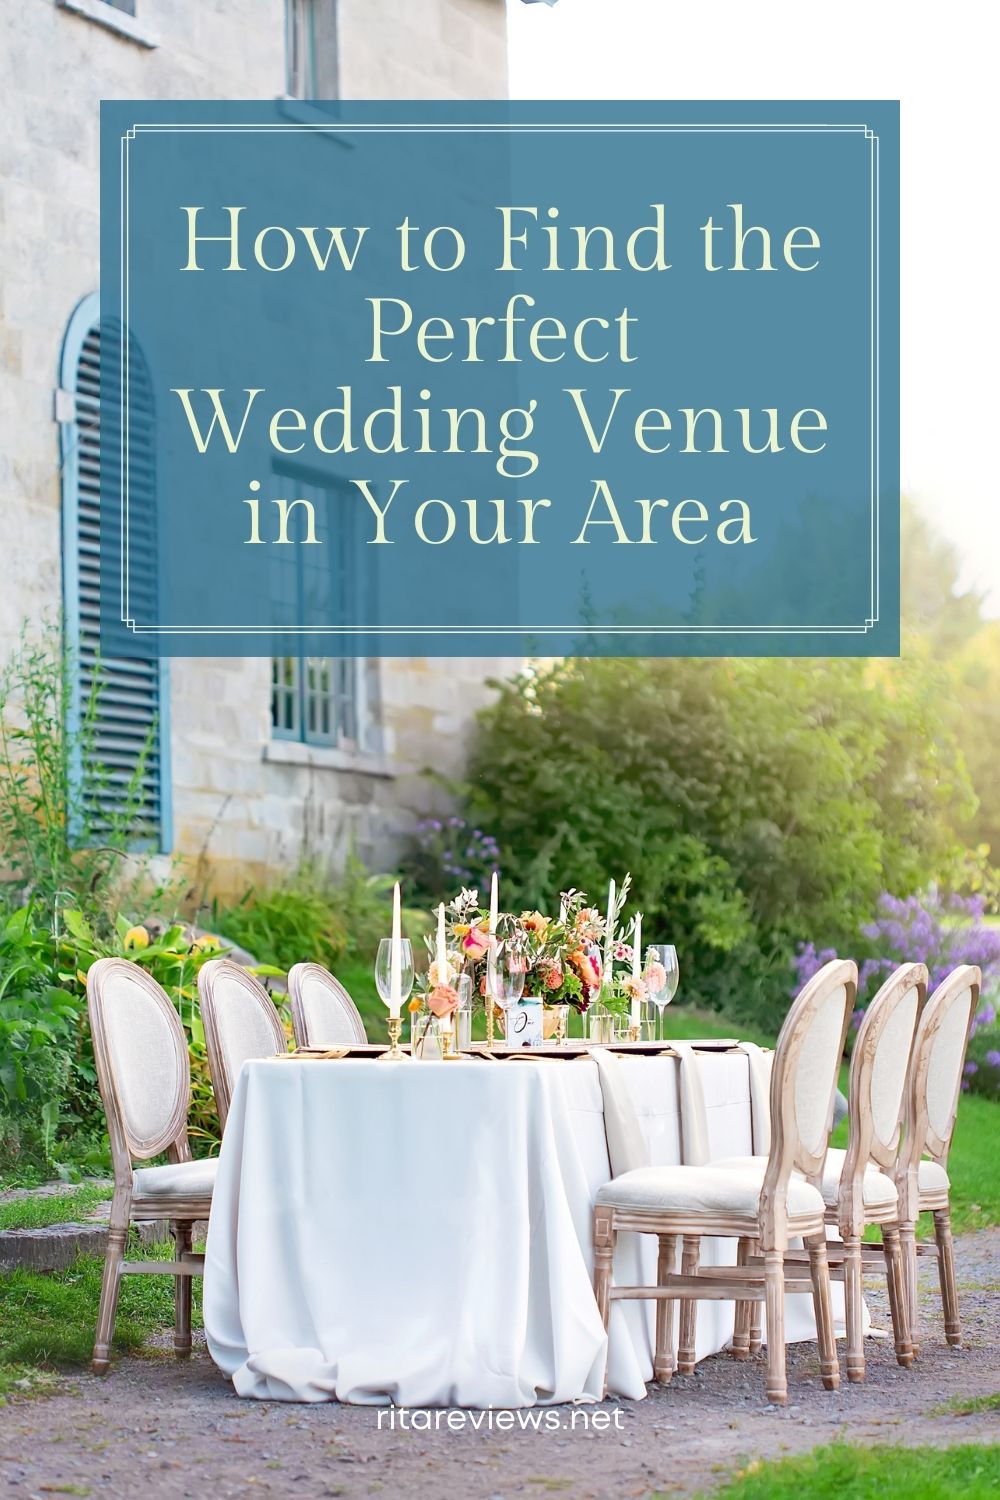 How to Find the Perfect Wedding Venue in Your Area